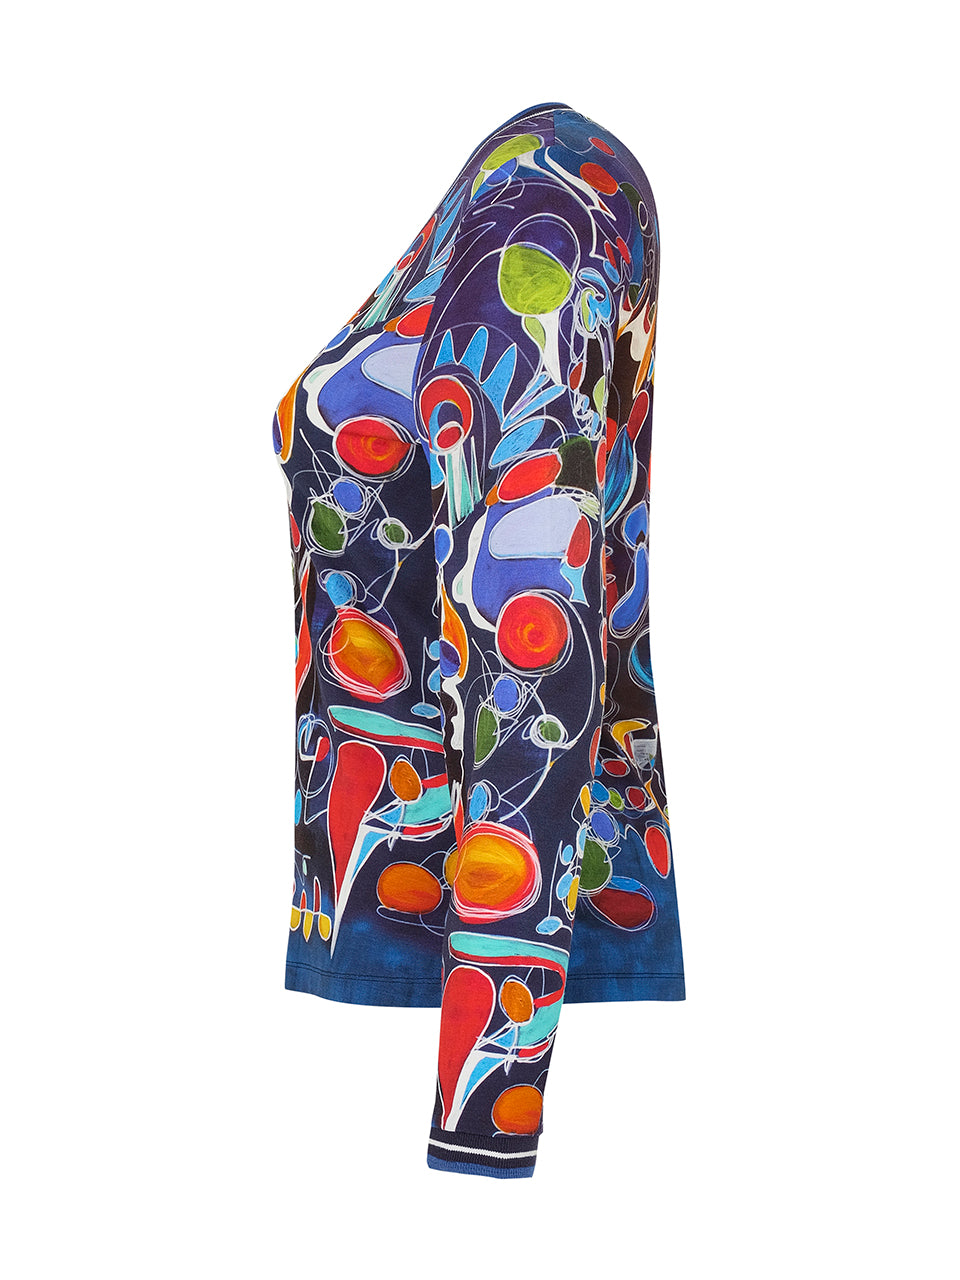 Colourful V Neck Abstract Print Top 73641